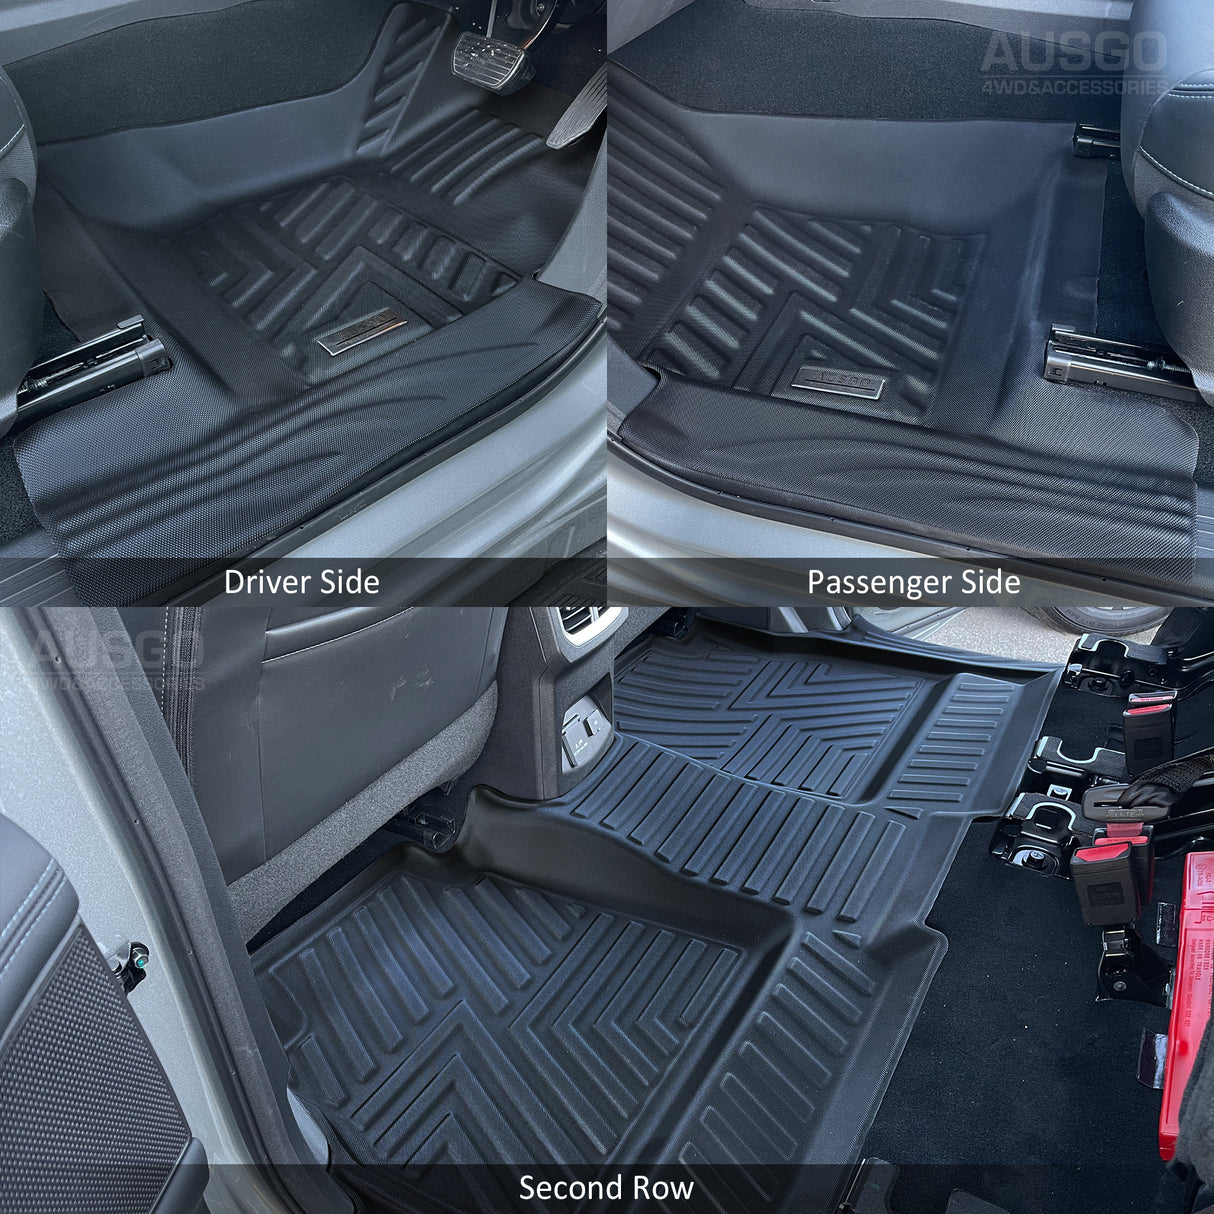 5D Moulded Floor Mats for GWM Cannon 2020-Onwards Door Sill Covered Car Mats